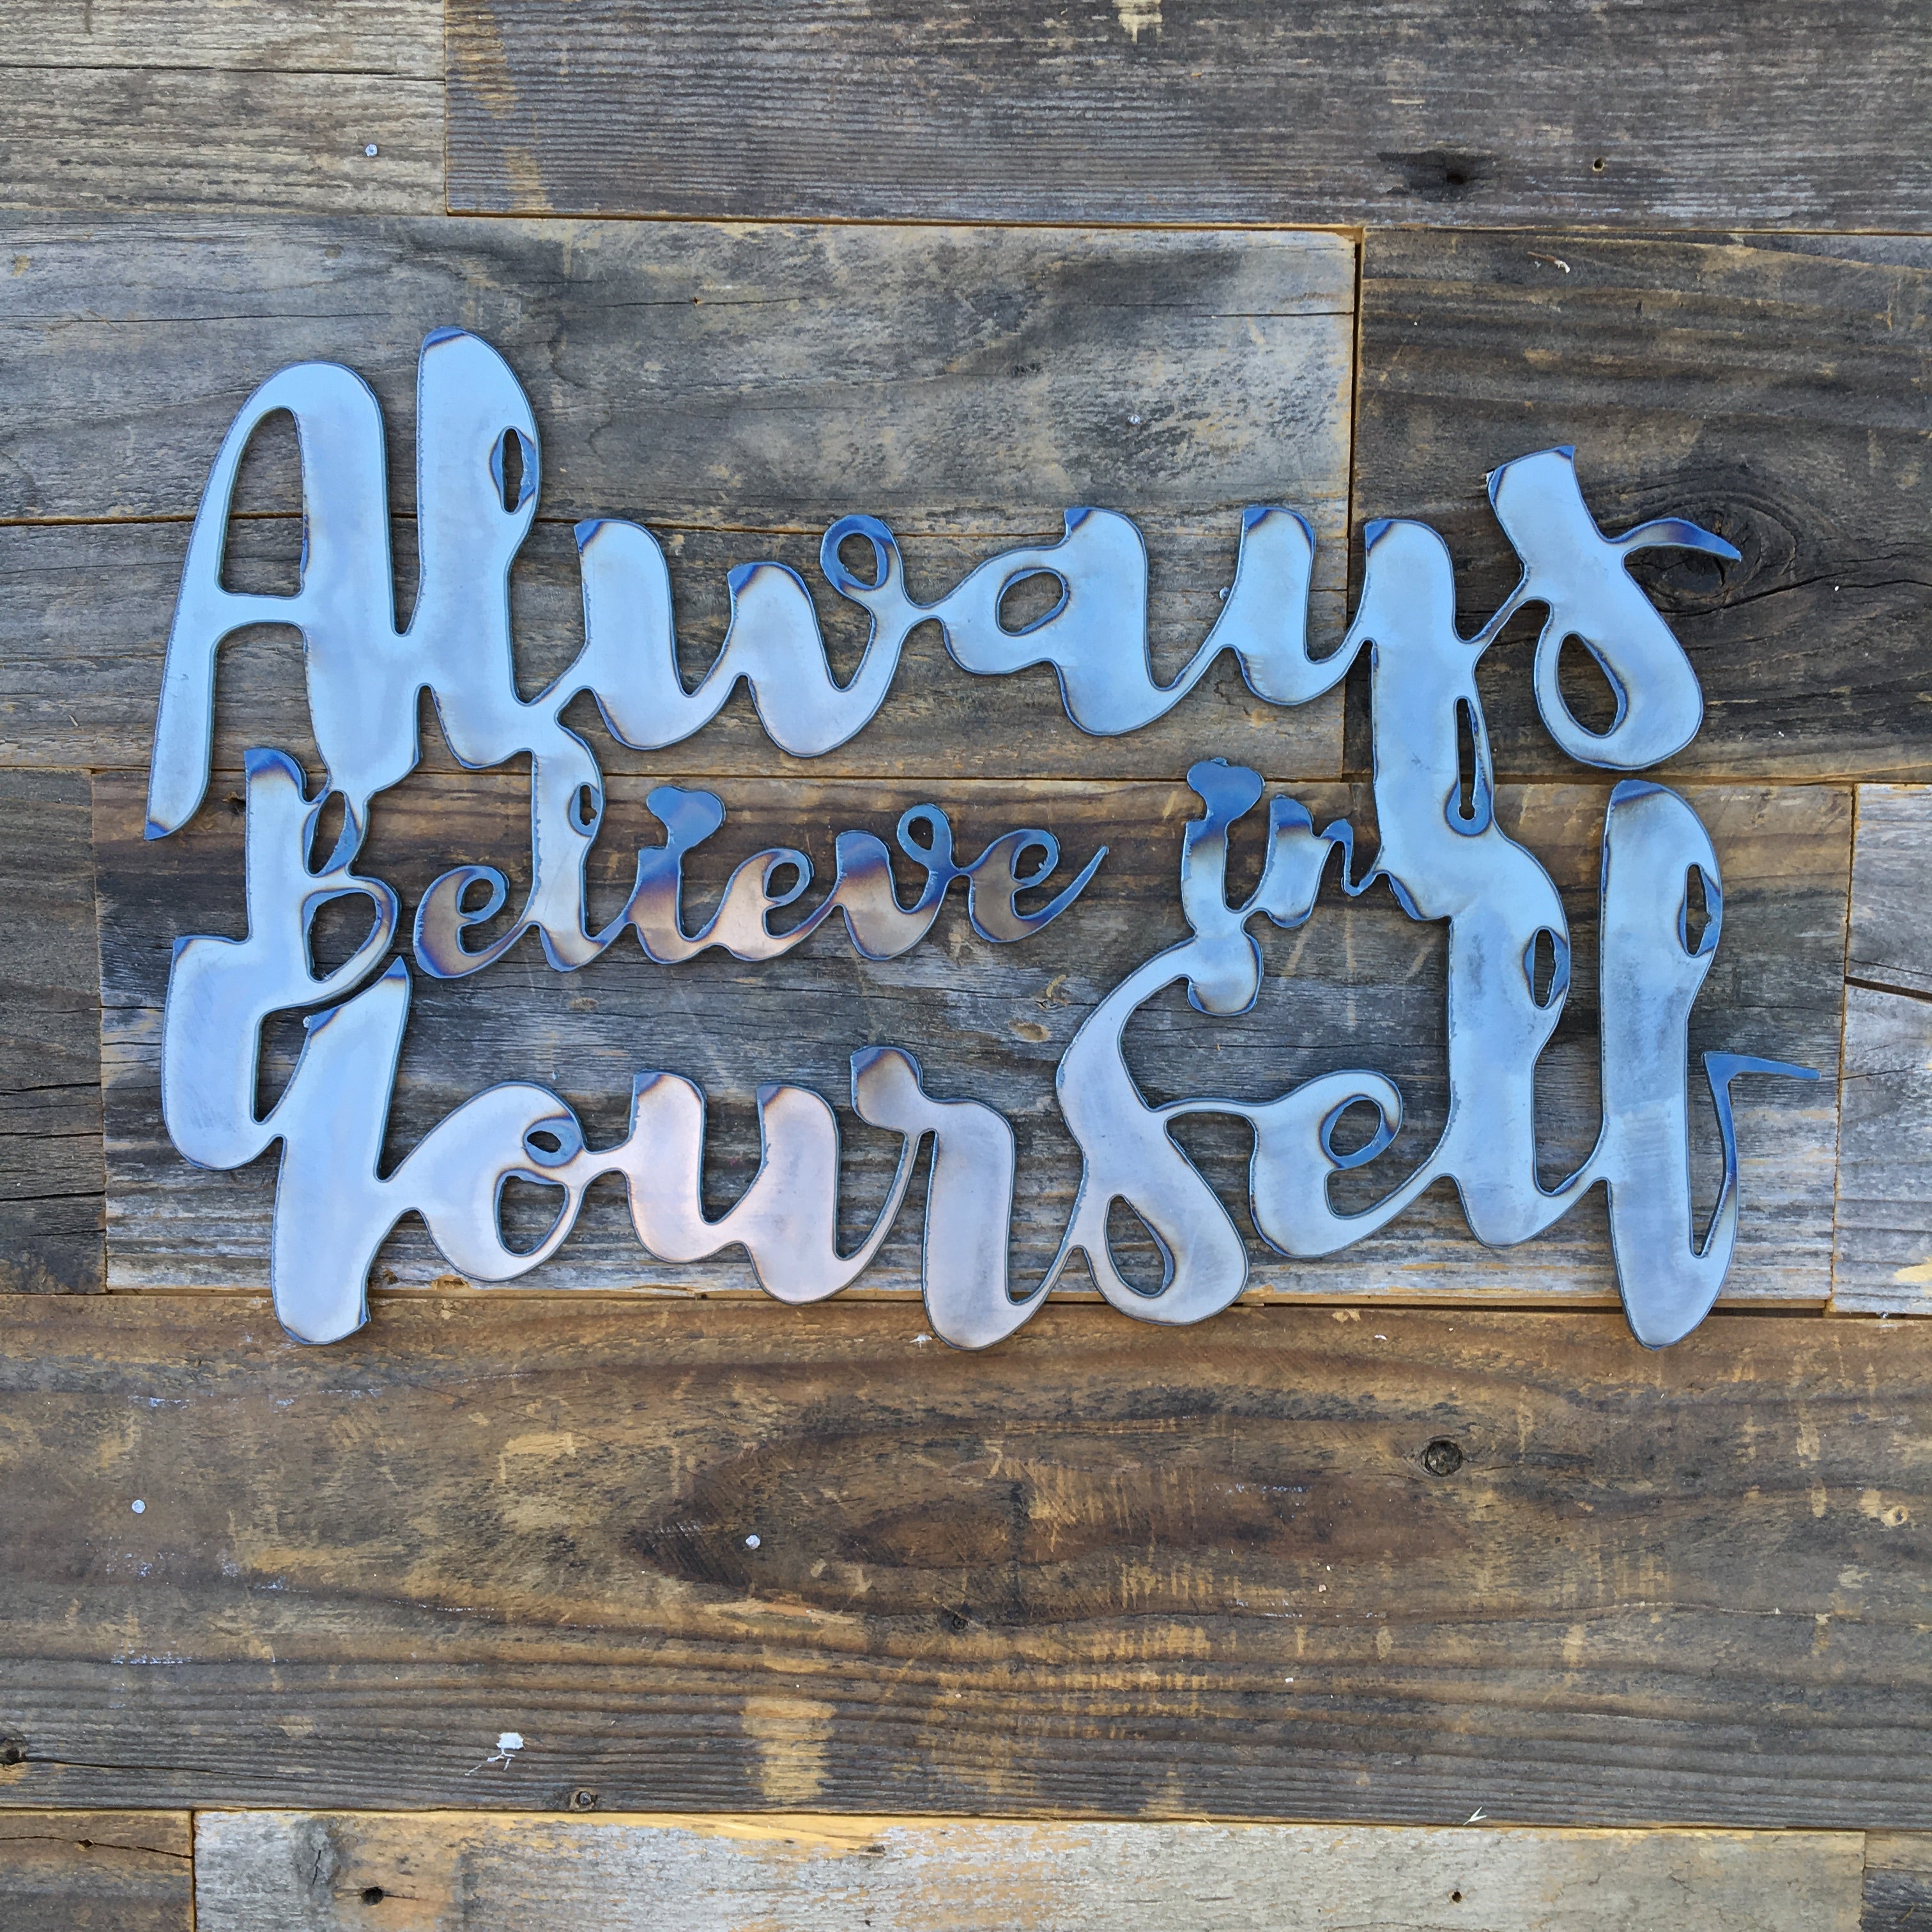 Rustic Home, Always Believe in Yourself 15 x 10,  Farmhouse, Metal Words, Kitchen Wall Decor, Home Decor, Farmhouse Sign, Motivational, Christian